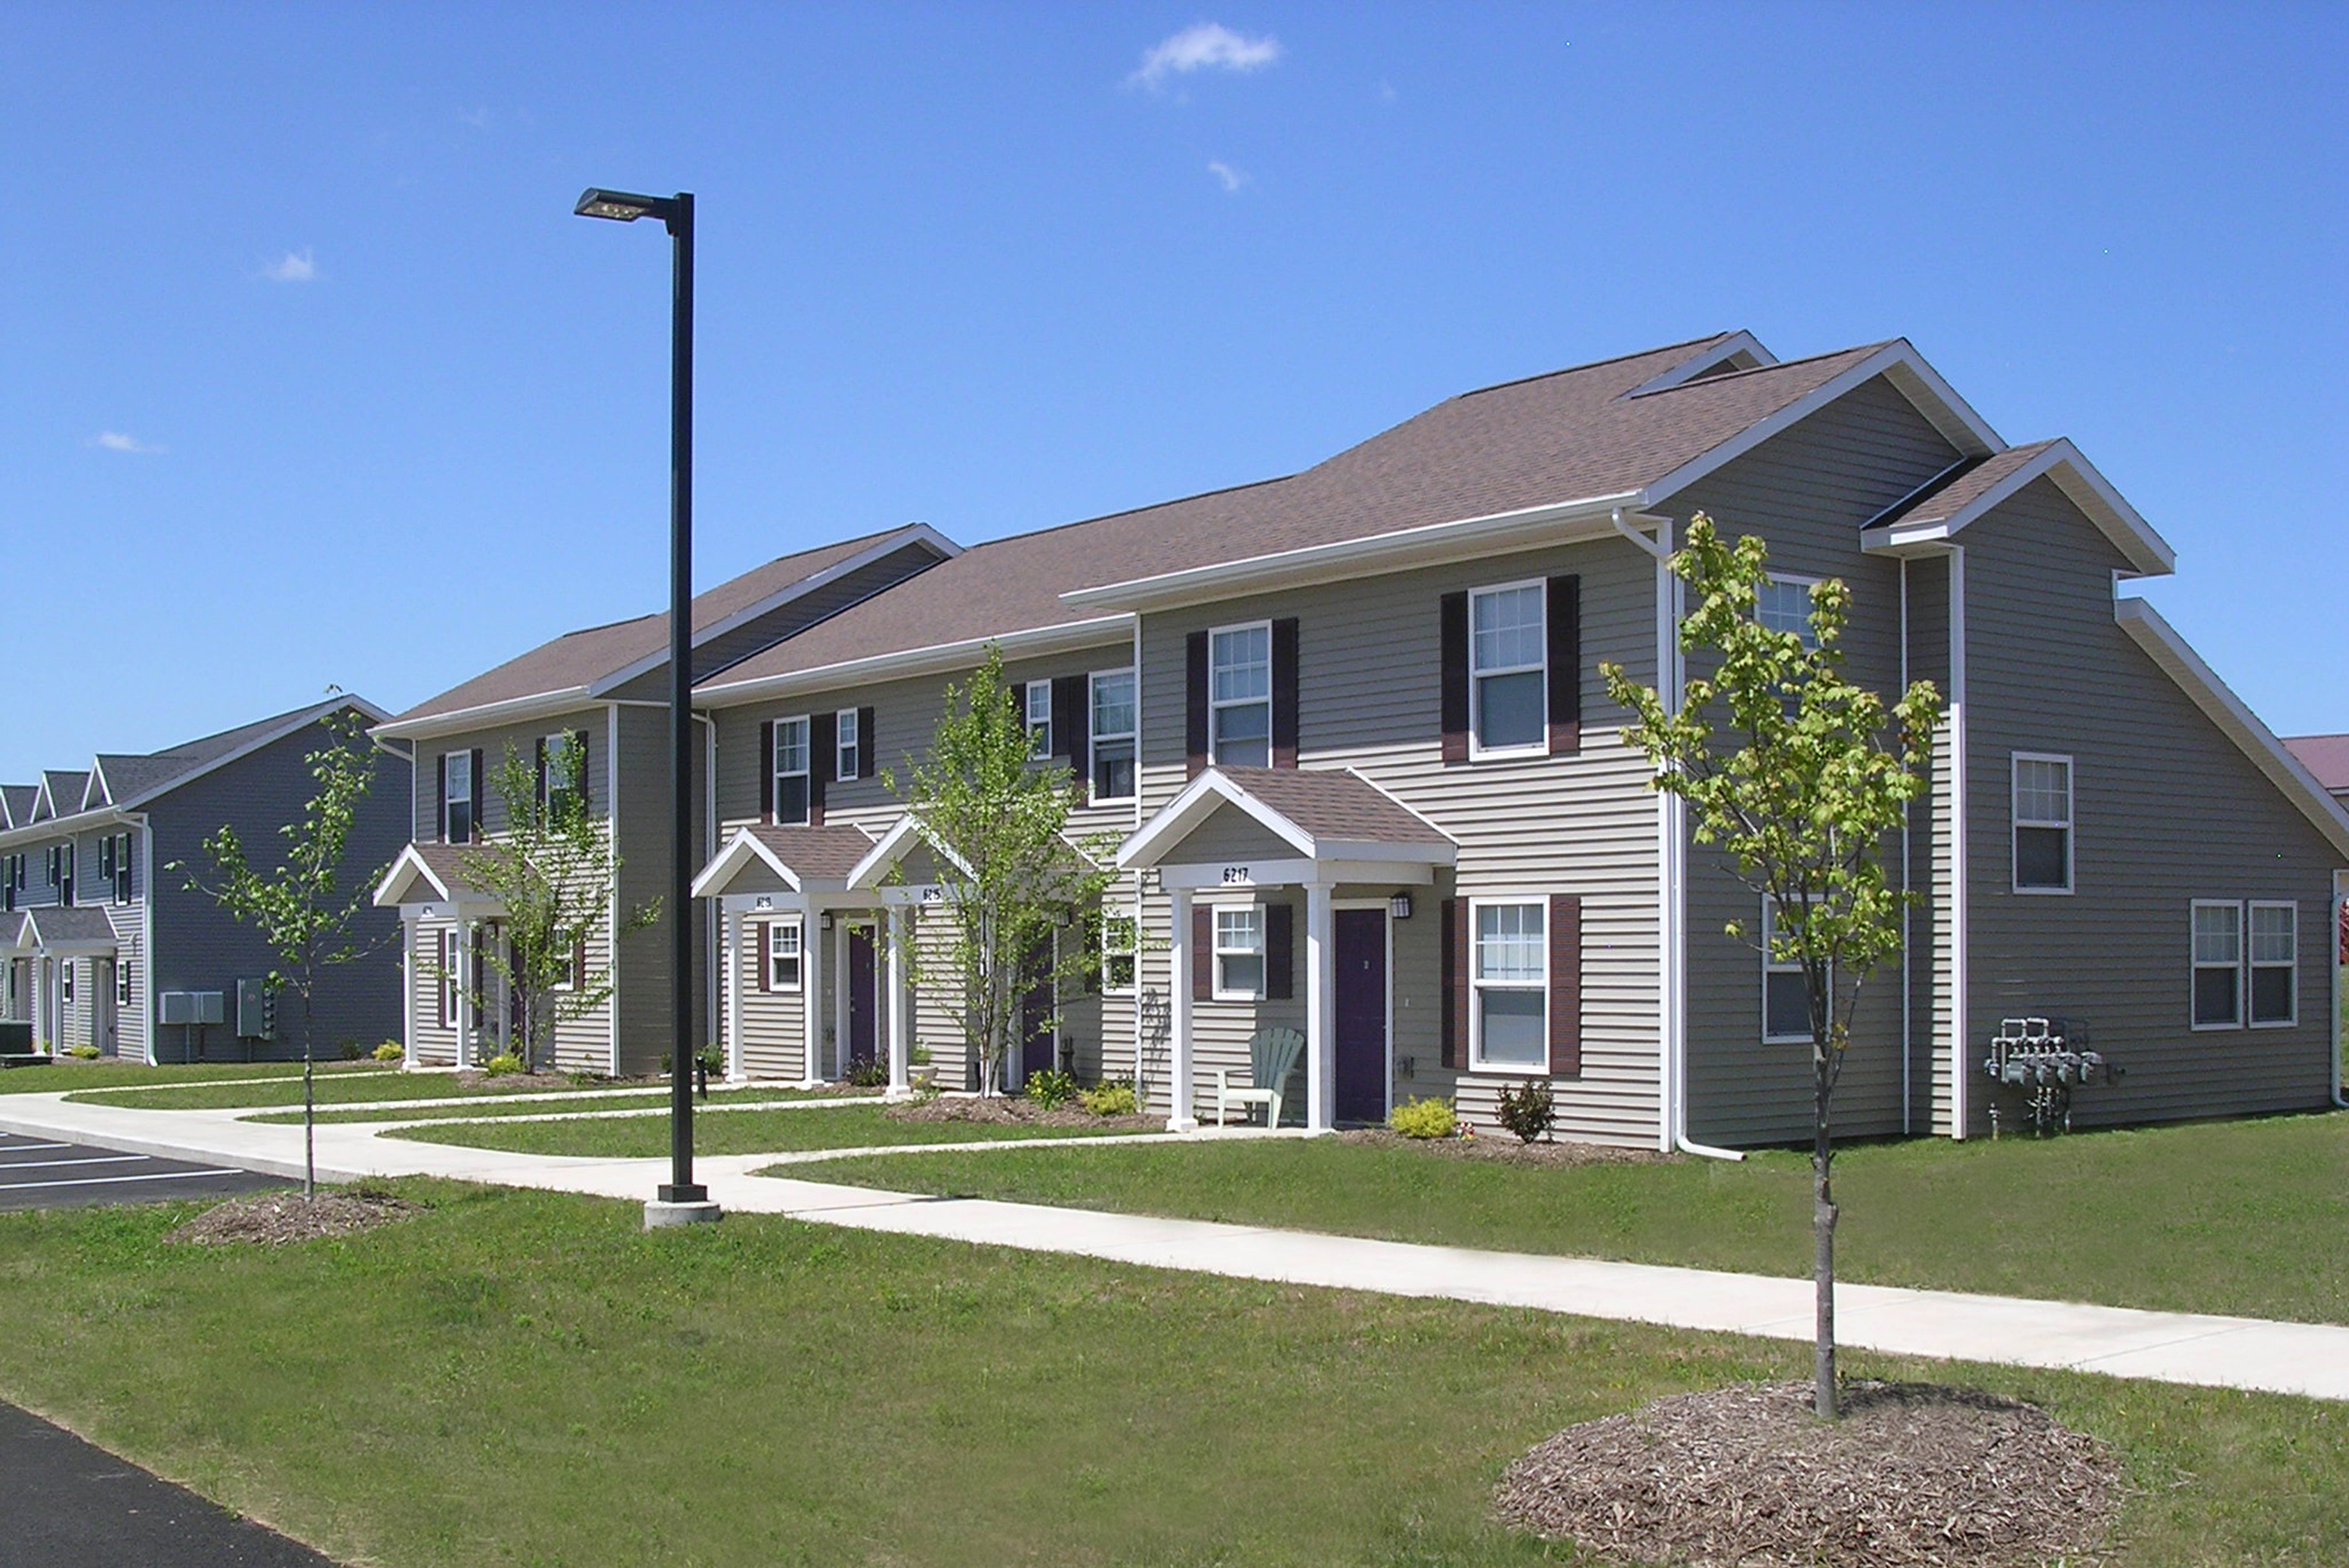 island hollow townhouses and senior apartments